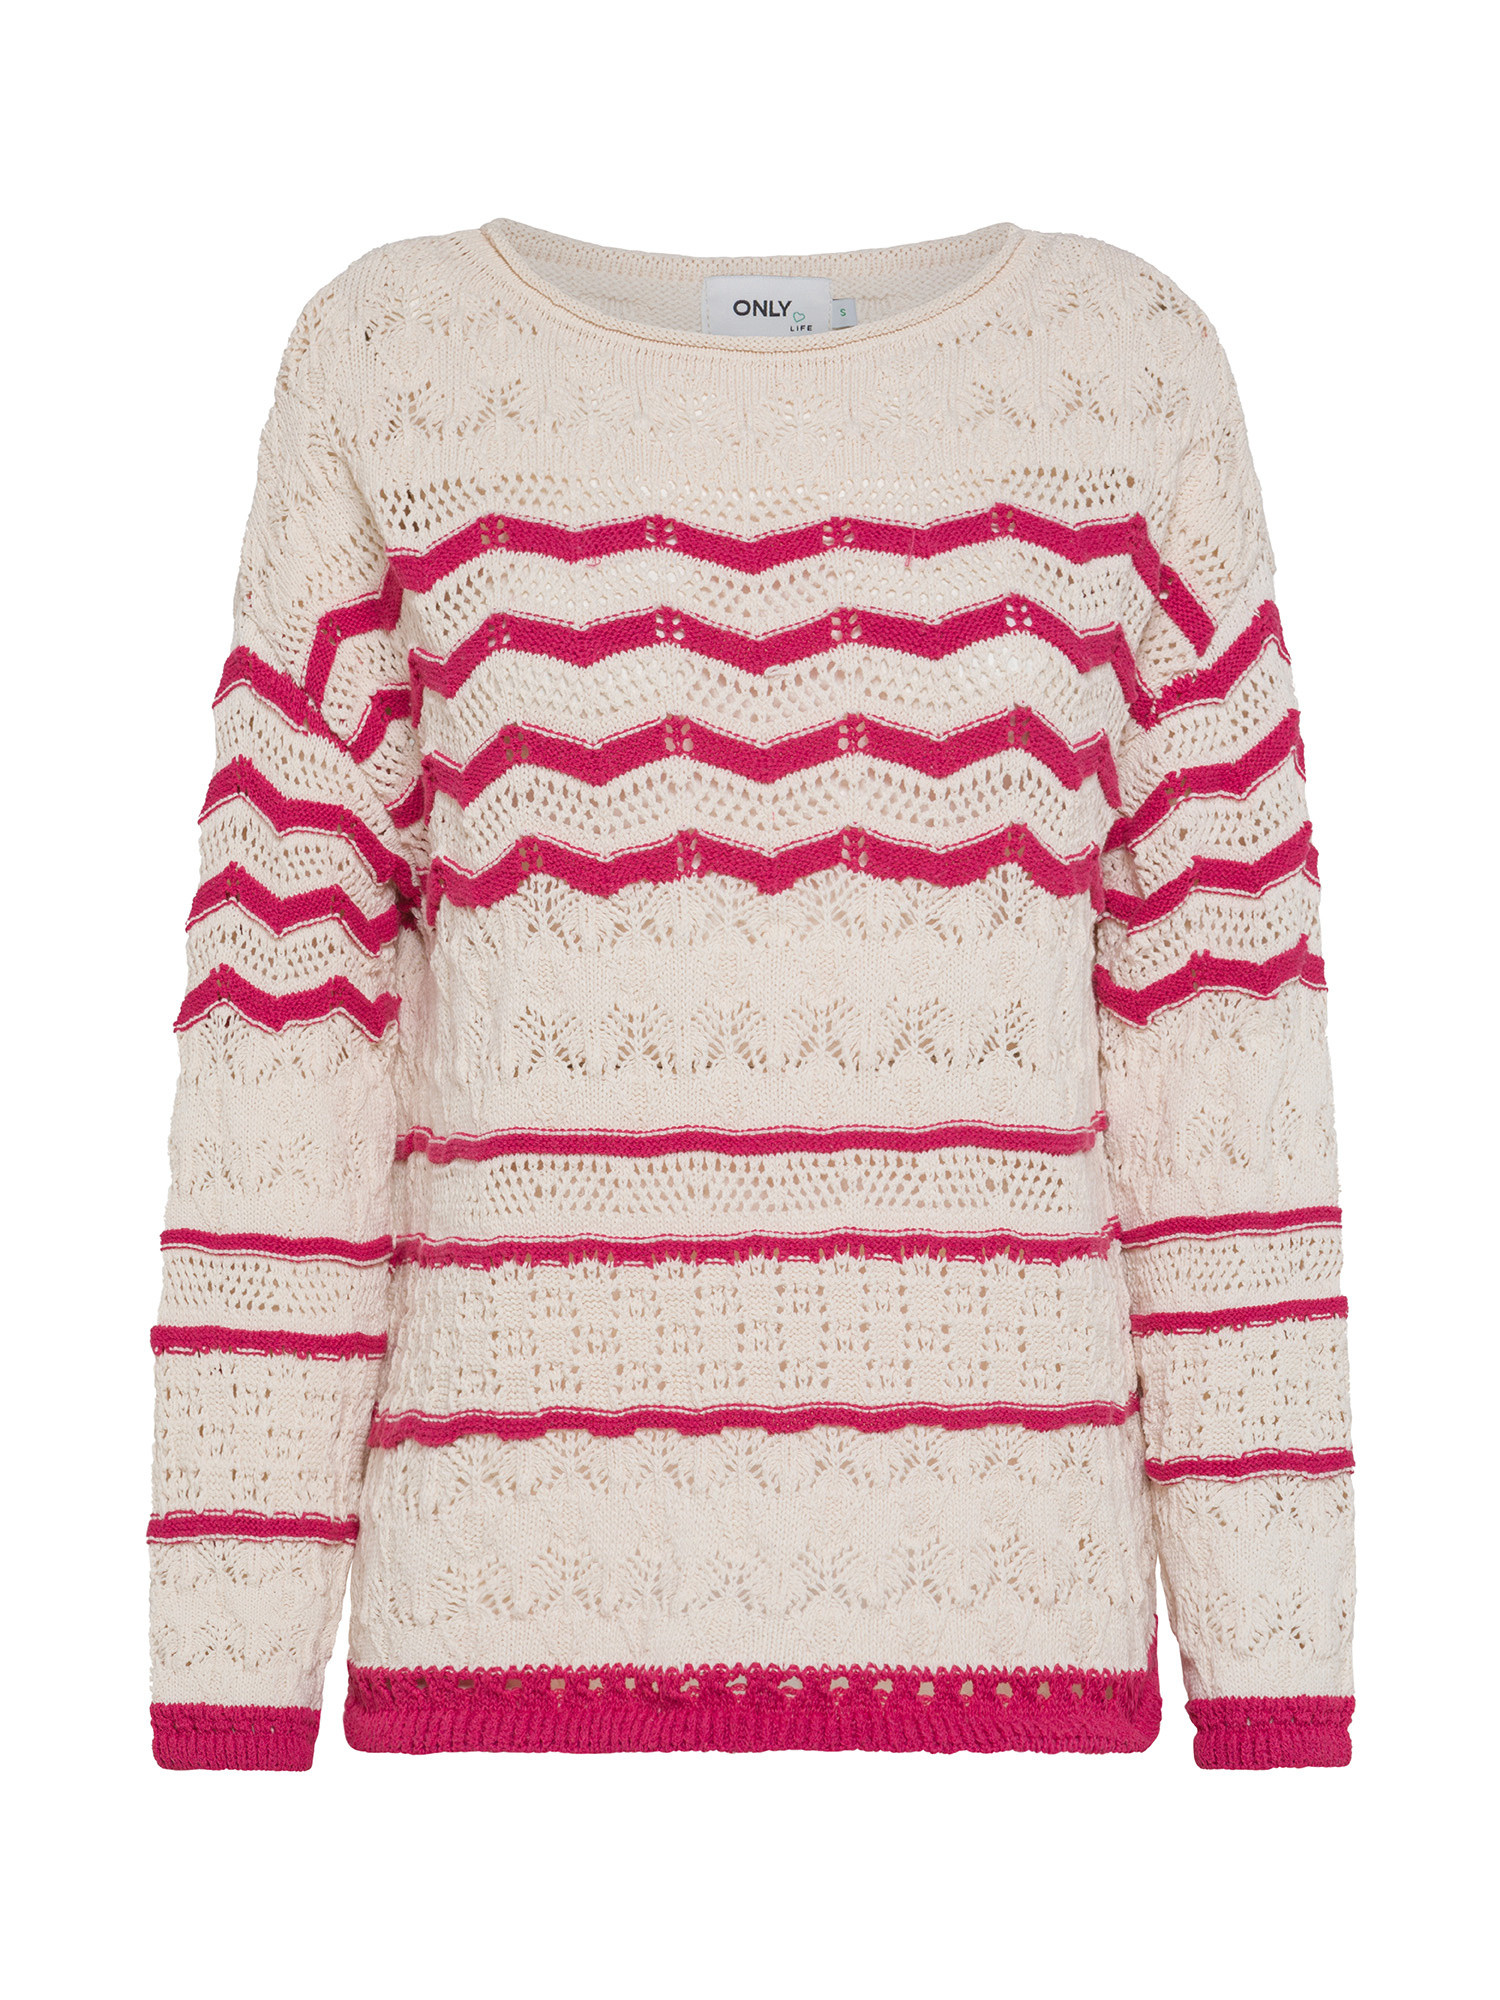 Only - Knitted pullover, Pink Fuchsia, large image number 0